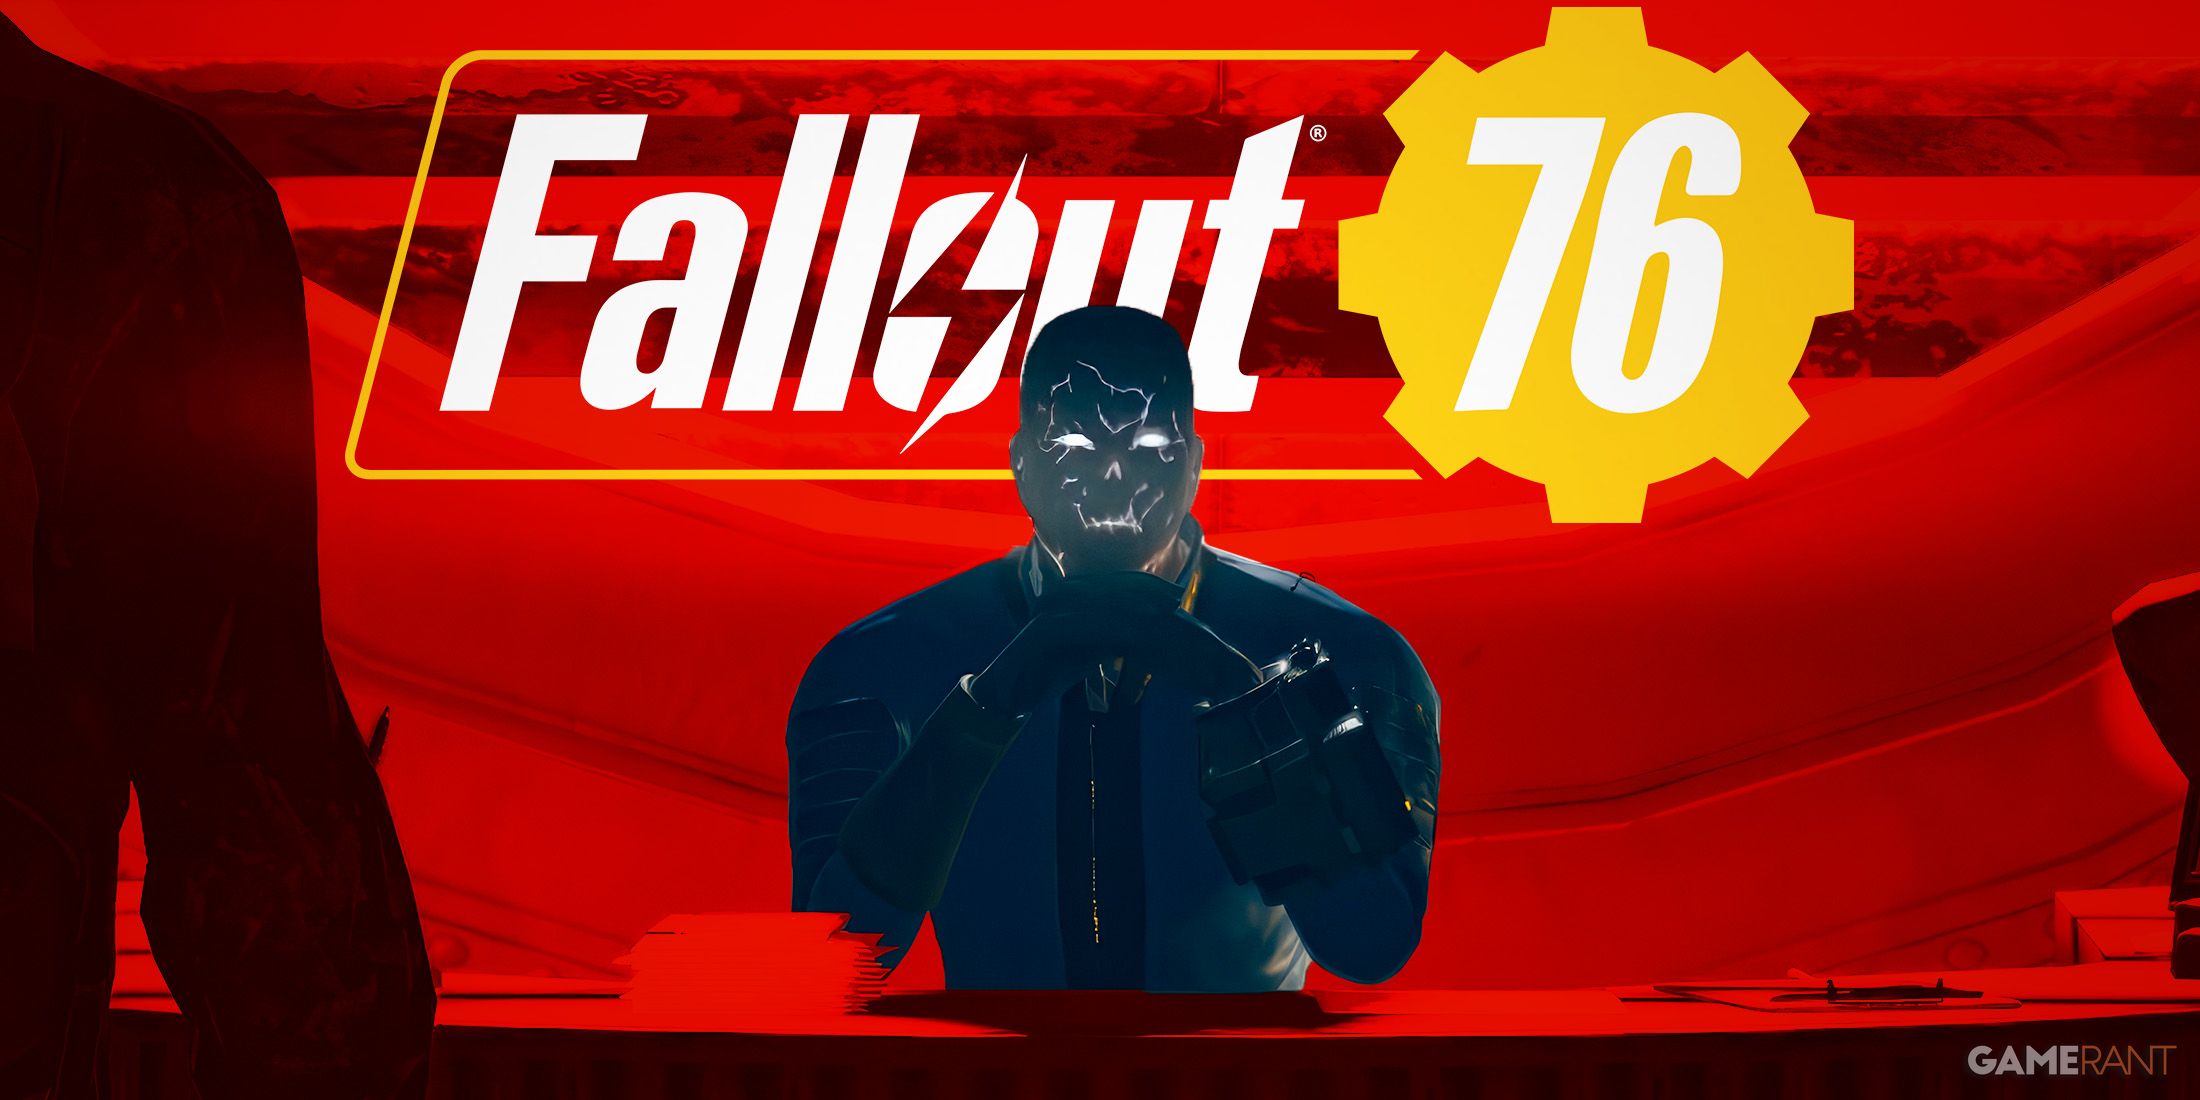 Fallout 76 Makes More Controversial Scoreboard Changes in Season 17